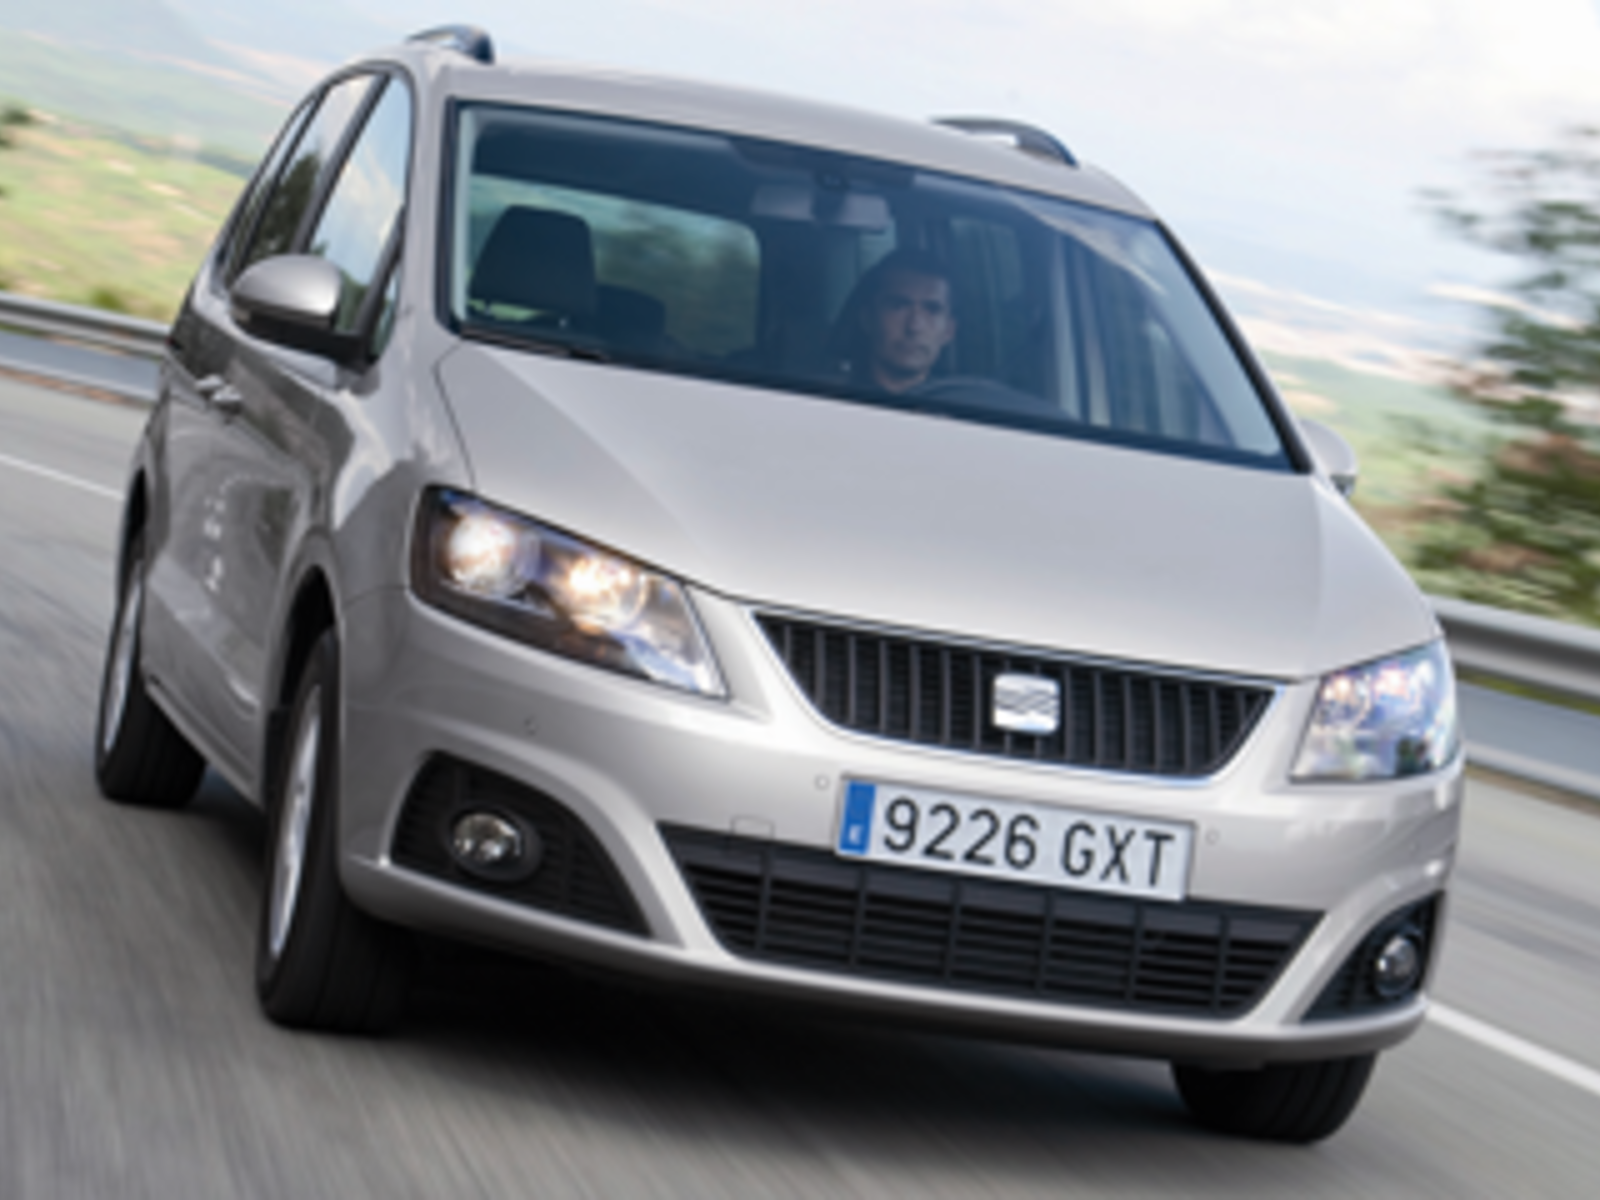 https://imgcdn.oe24.at/seat_alhambra_new_1.png/1600x1200Crop/4.285.748